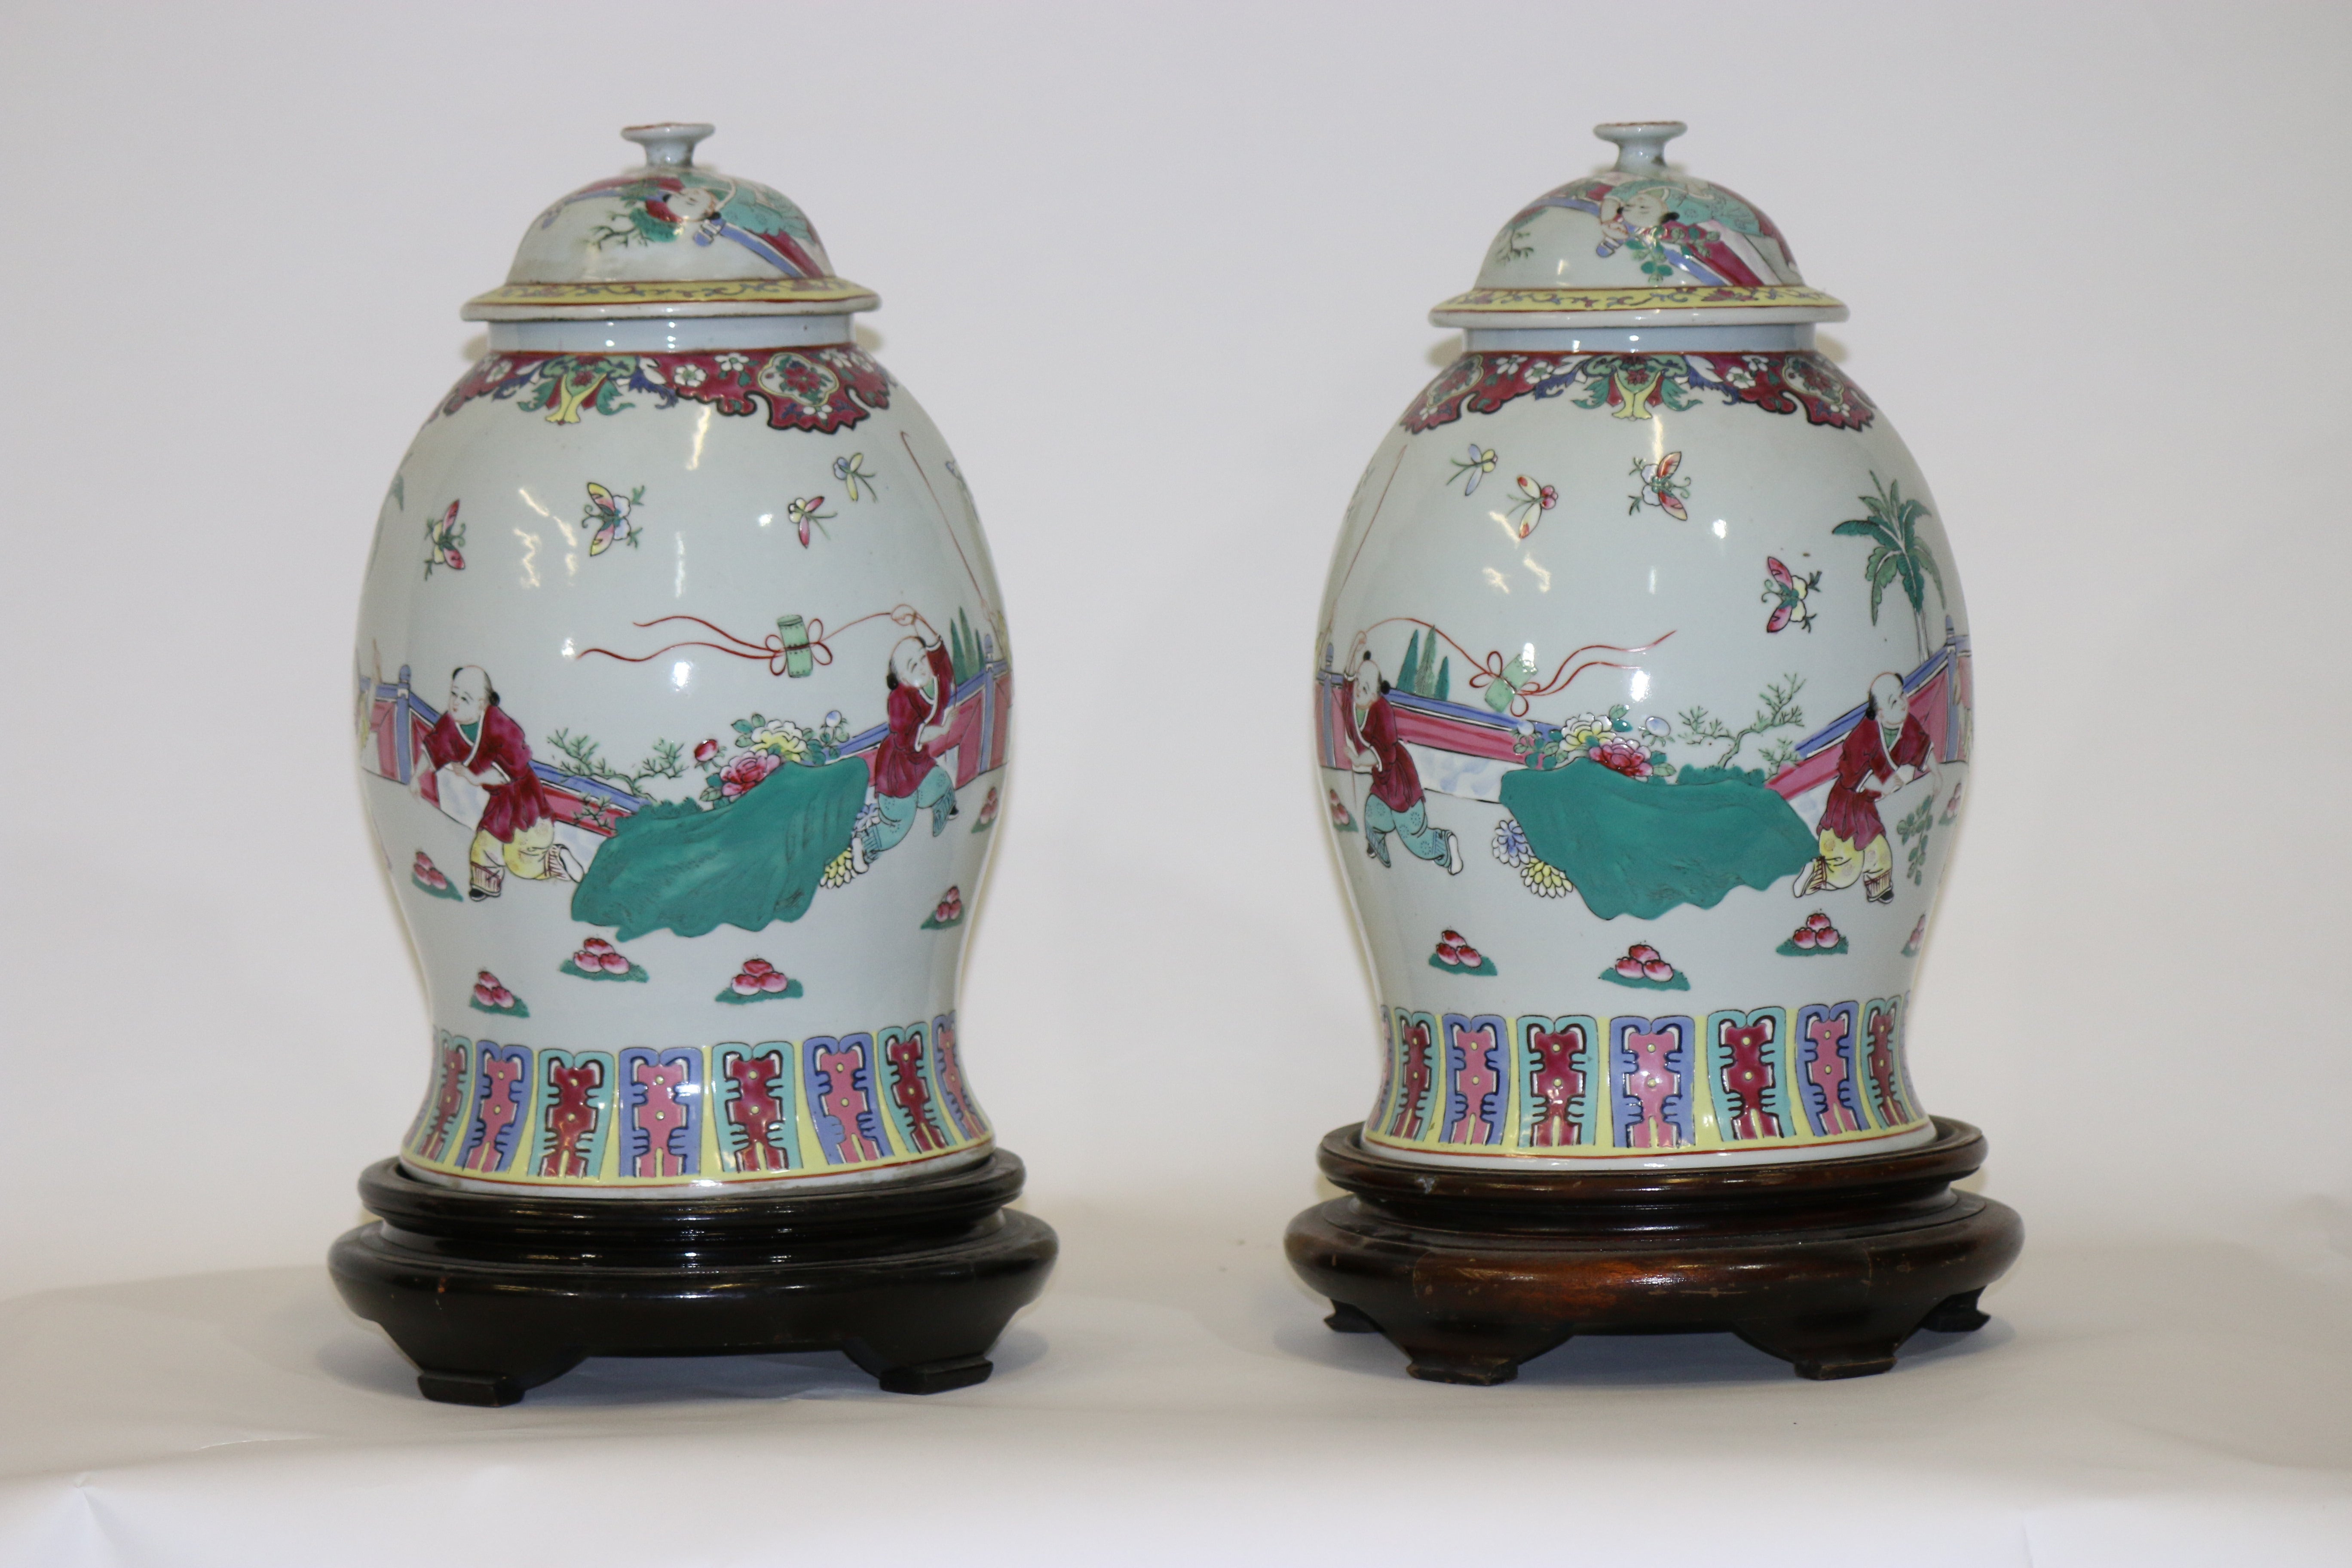 Chinese Export Pair of Large Impressive Chinese Baluster Jars with Covers, circa 1880 For Sale